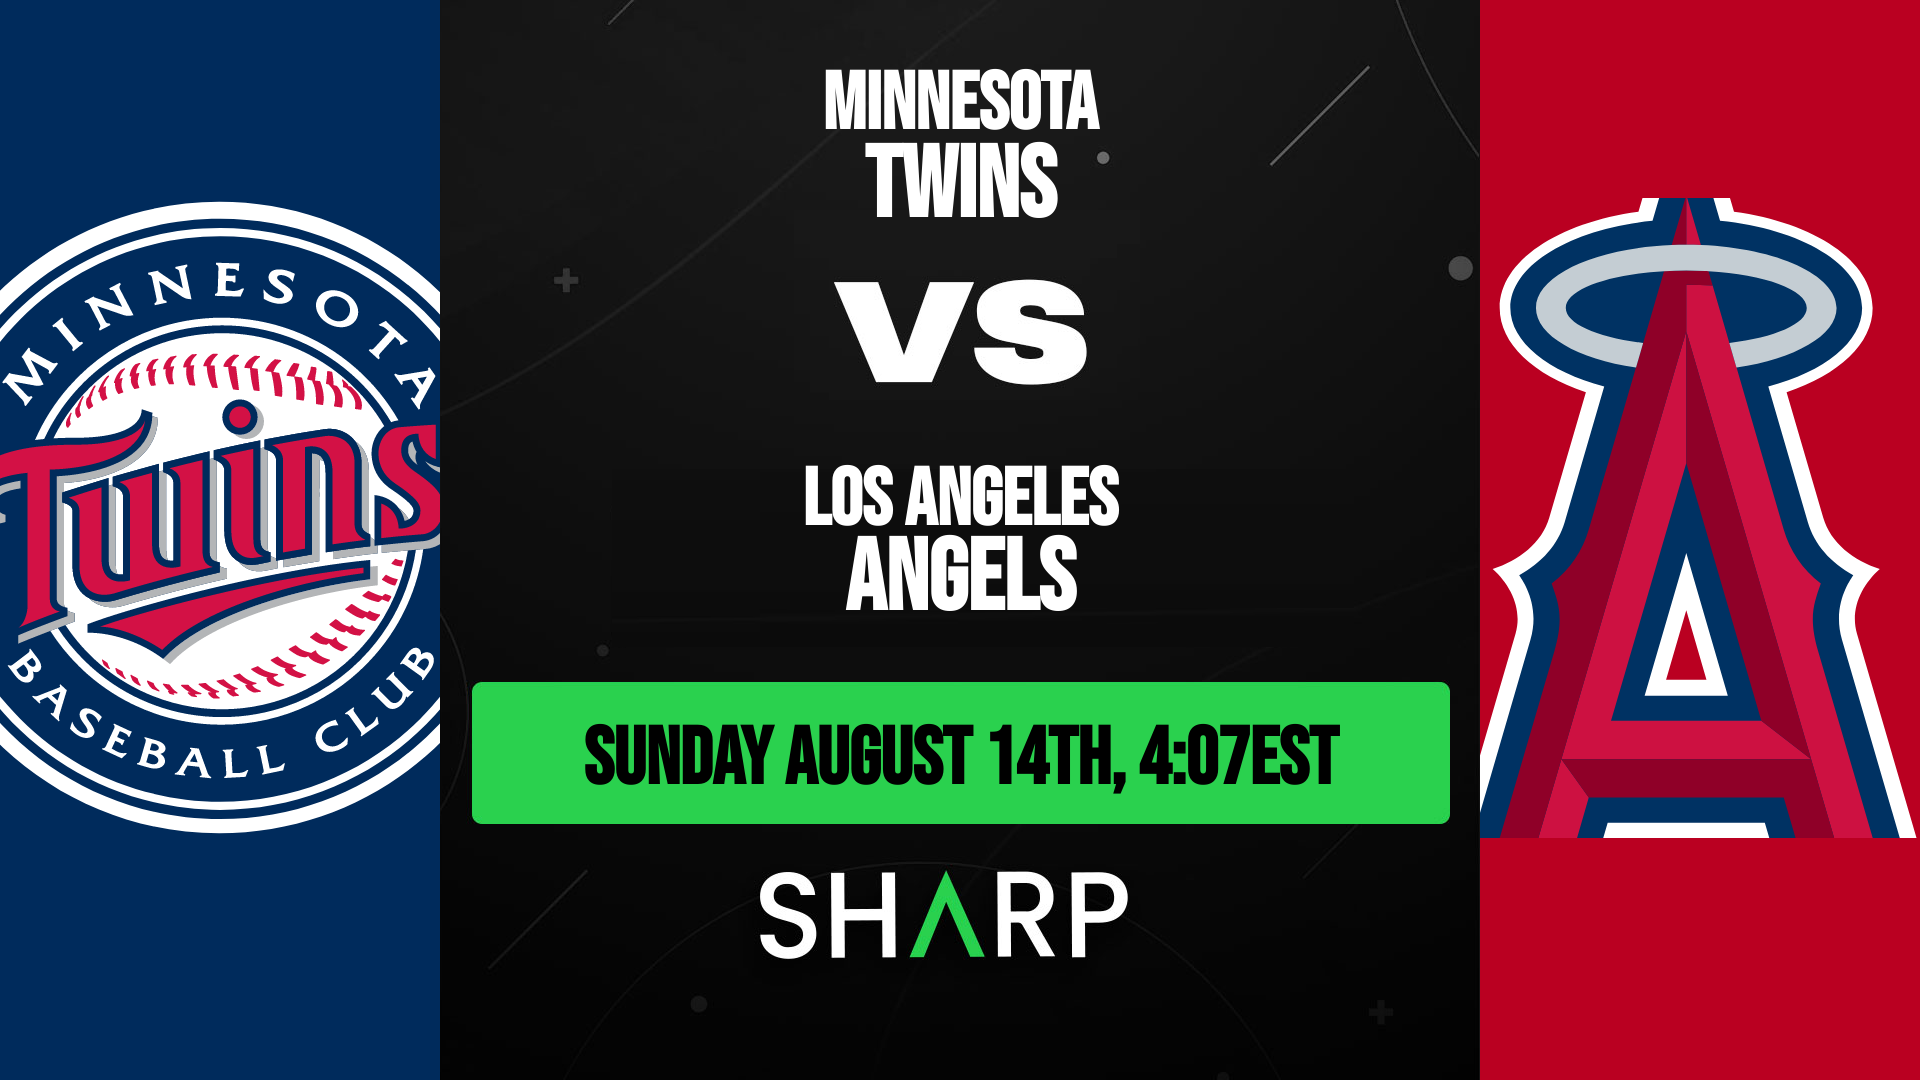 Minnesota Twins @ Los Angeles Angels Matchup Preview - August 14th, 2022